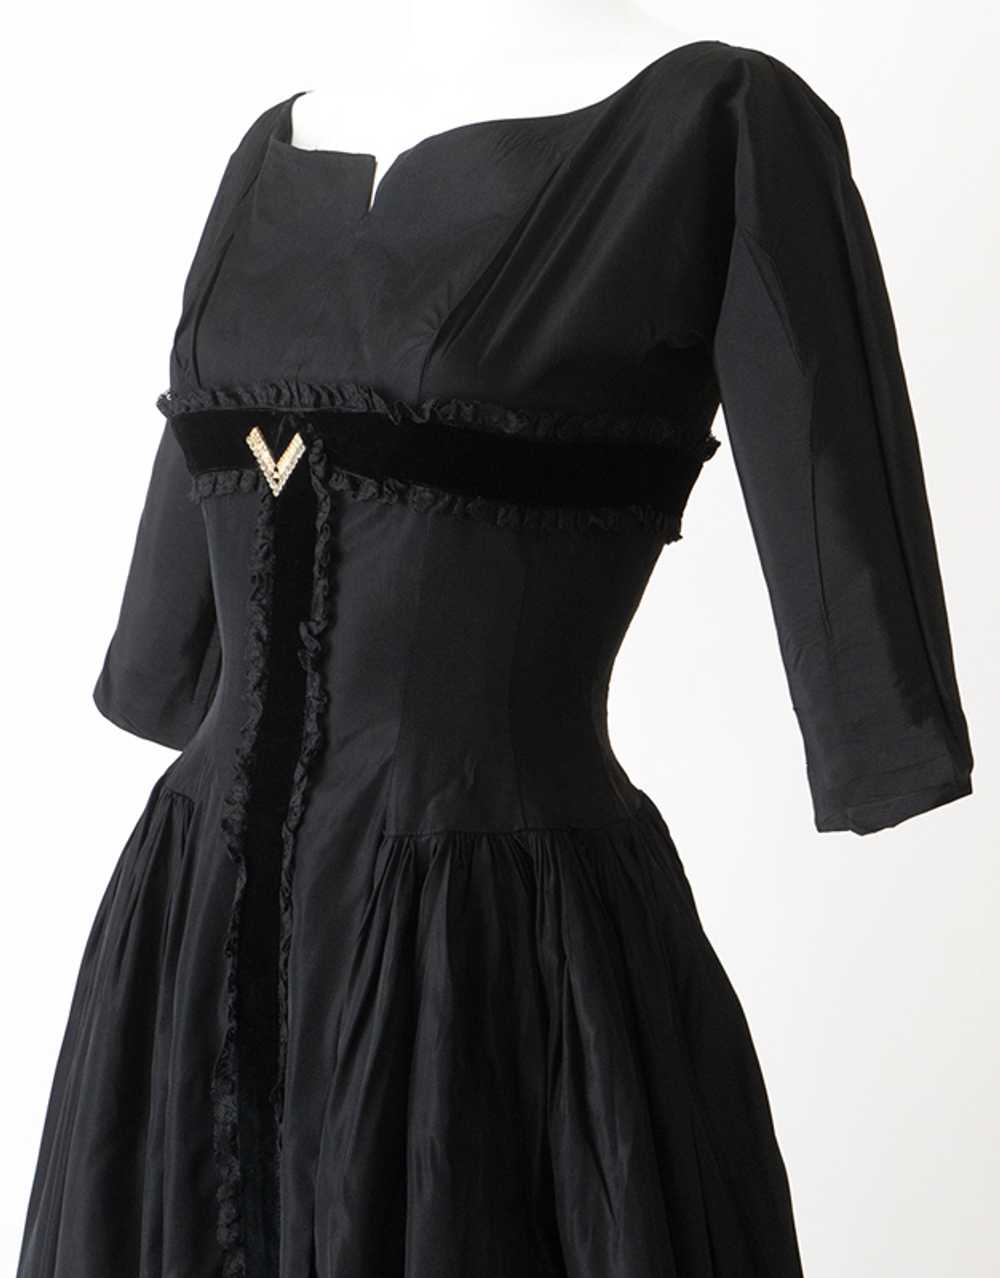 1950s Fit and Flare Party Dress - image 3